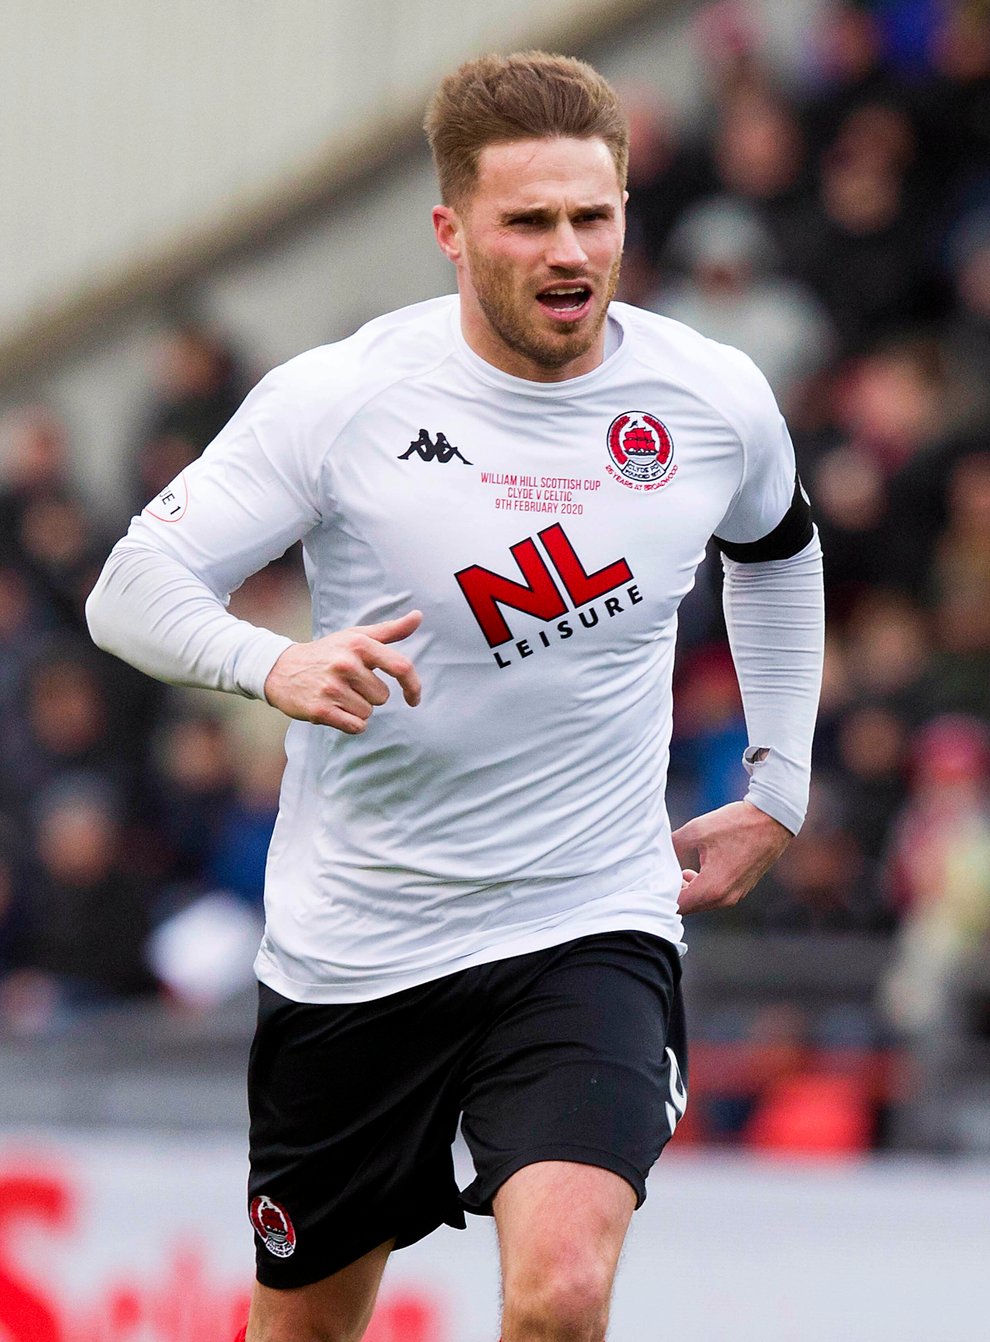 David Goodwillie scored two goals to help Clyde beat Alloa 2-1 (Jeff Holmes/PA)